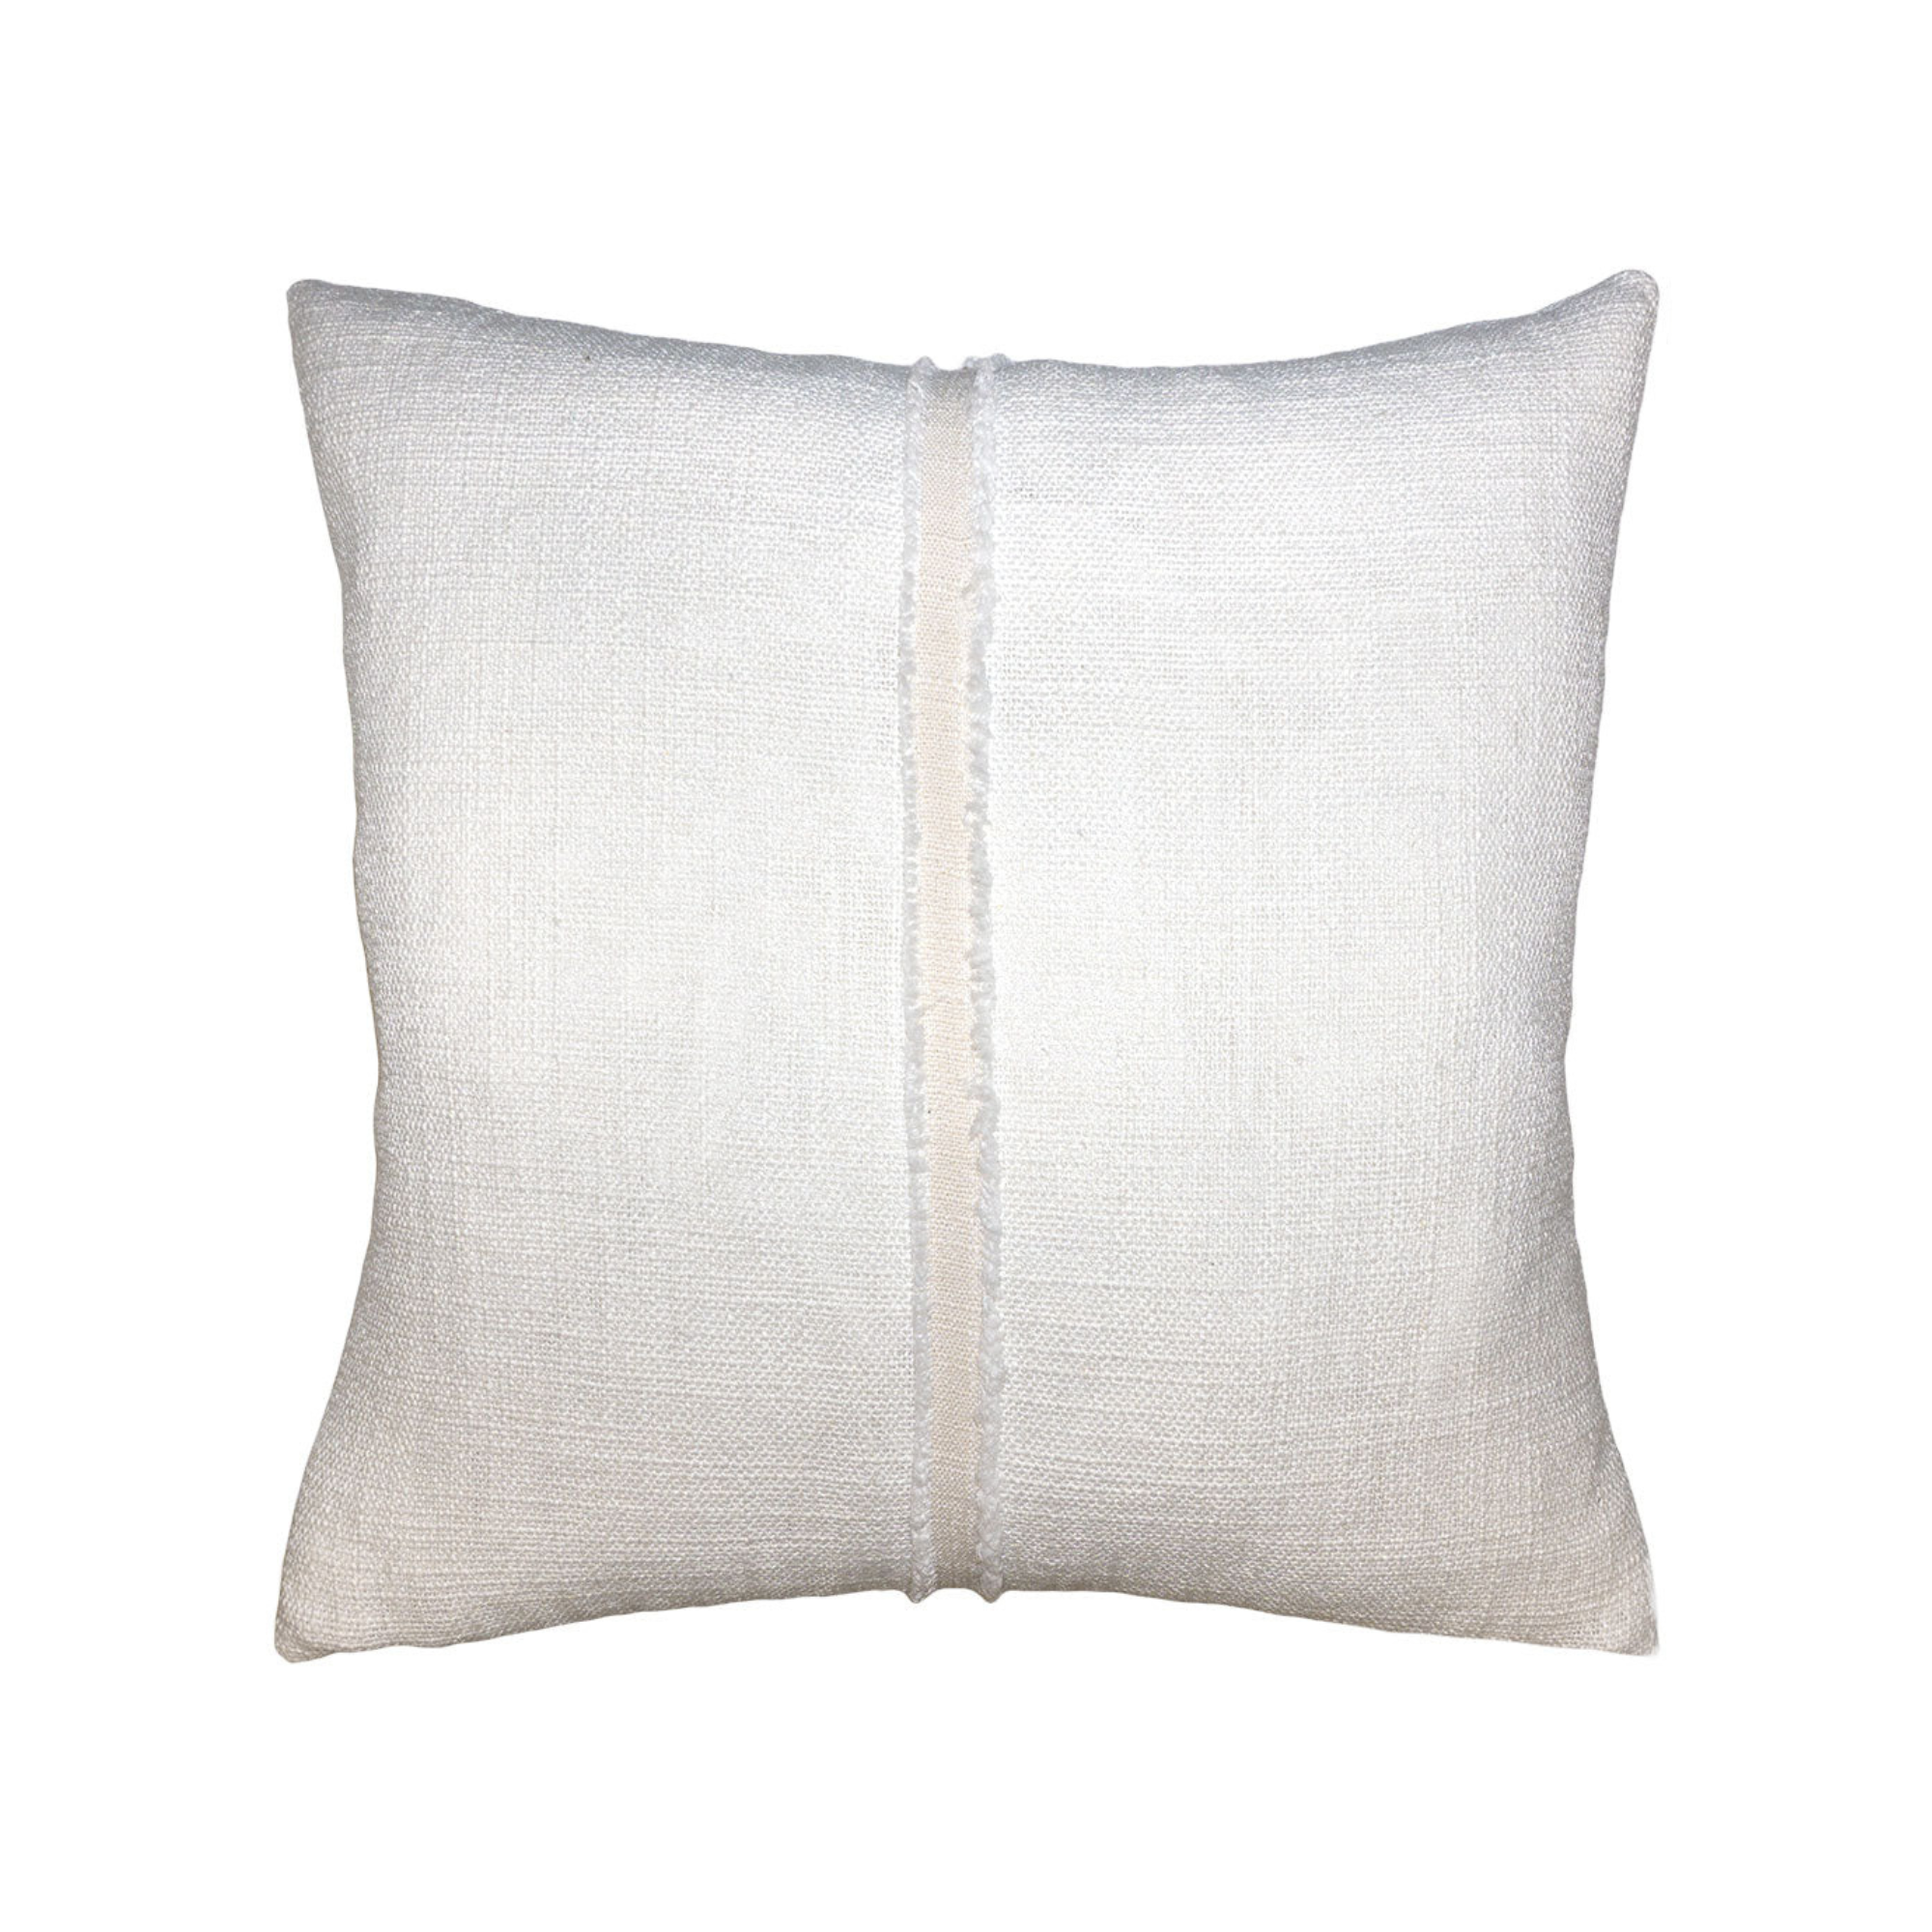 Hopsack Stitched White Pillow